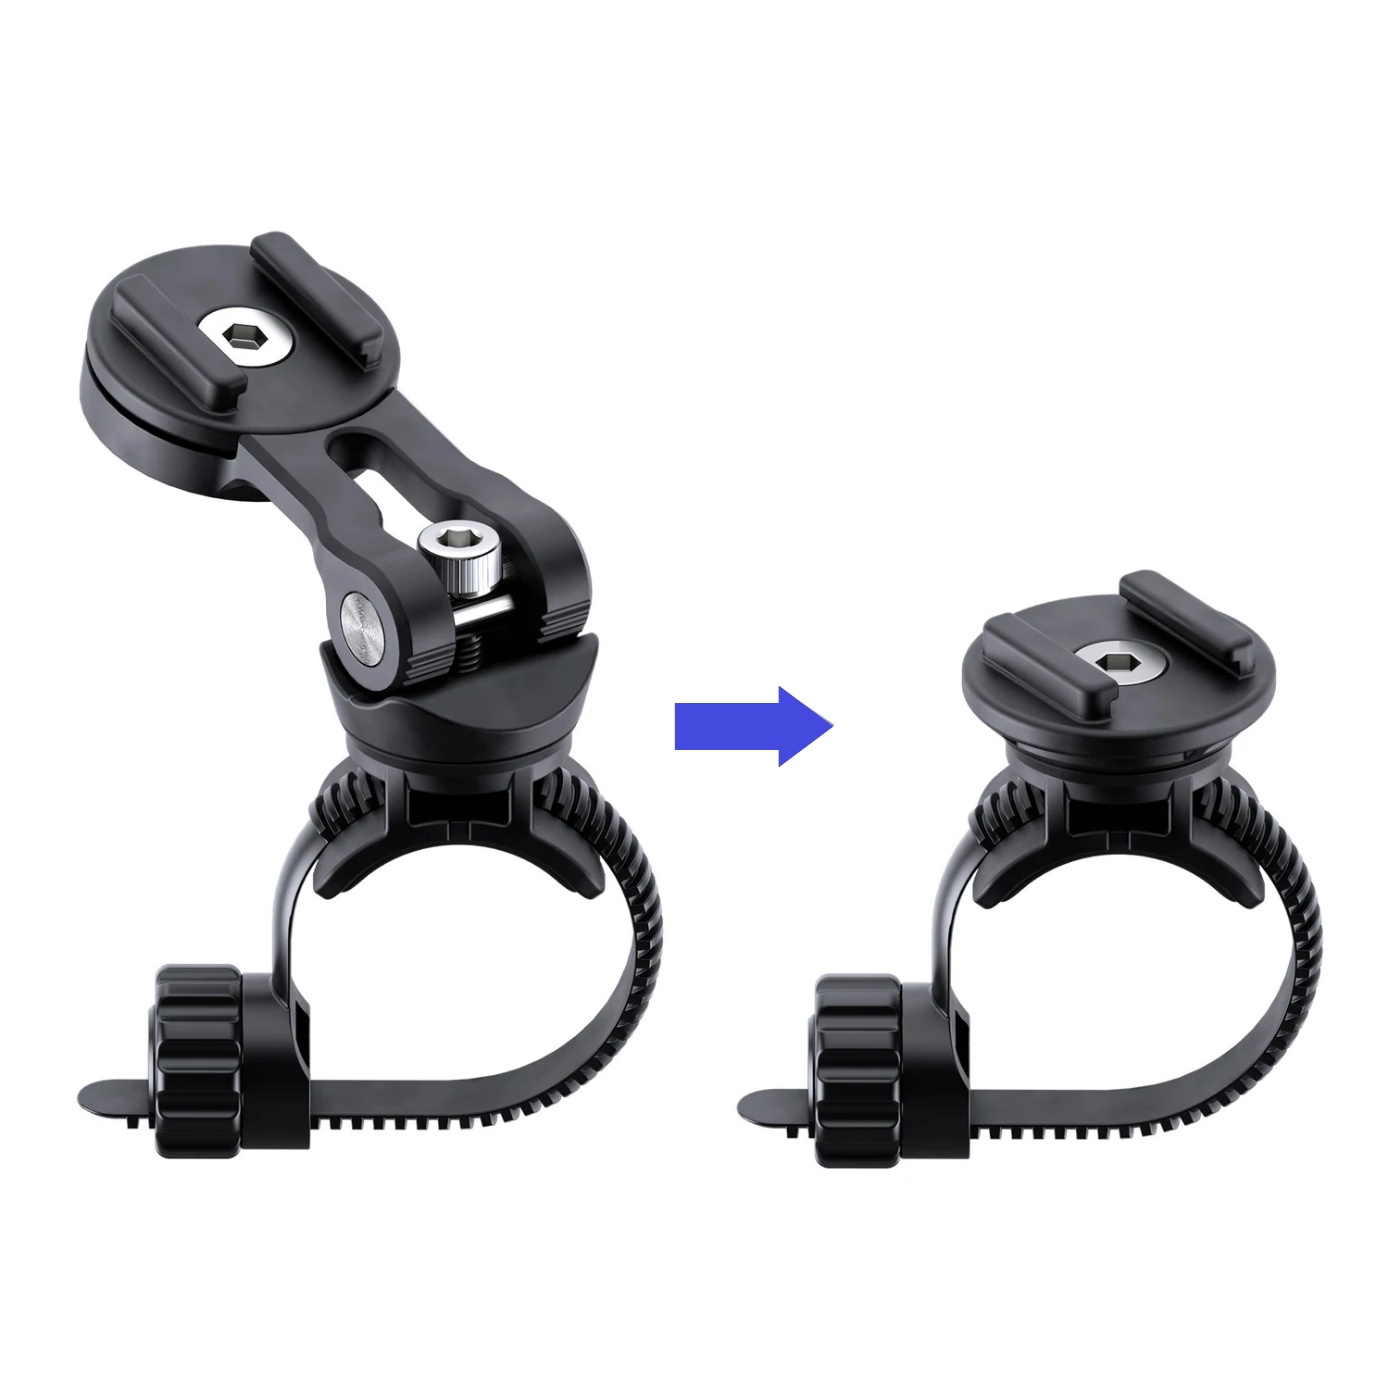 The SP Connect Universal Mount can be attached to any bar or tube with a diameter between 20 and 90 mm (0.9 – 3.5 inch). The spring loaded mount allows for a toolless 360°